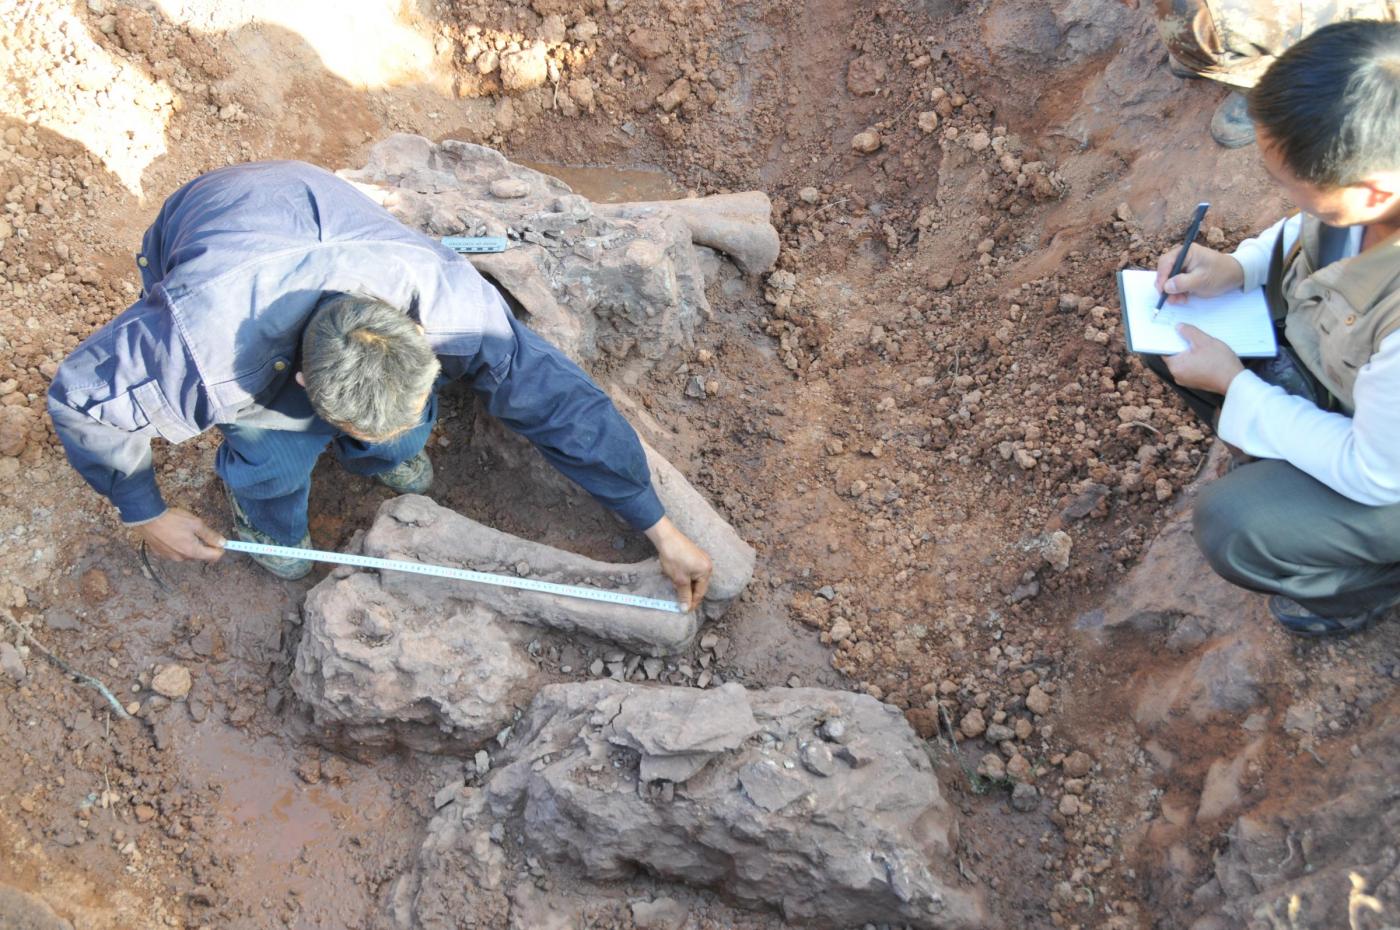 180 Million-year-old Dinosaur Fossils Unearthed By Road